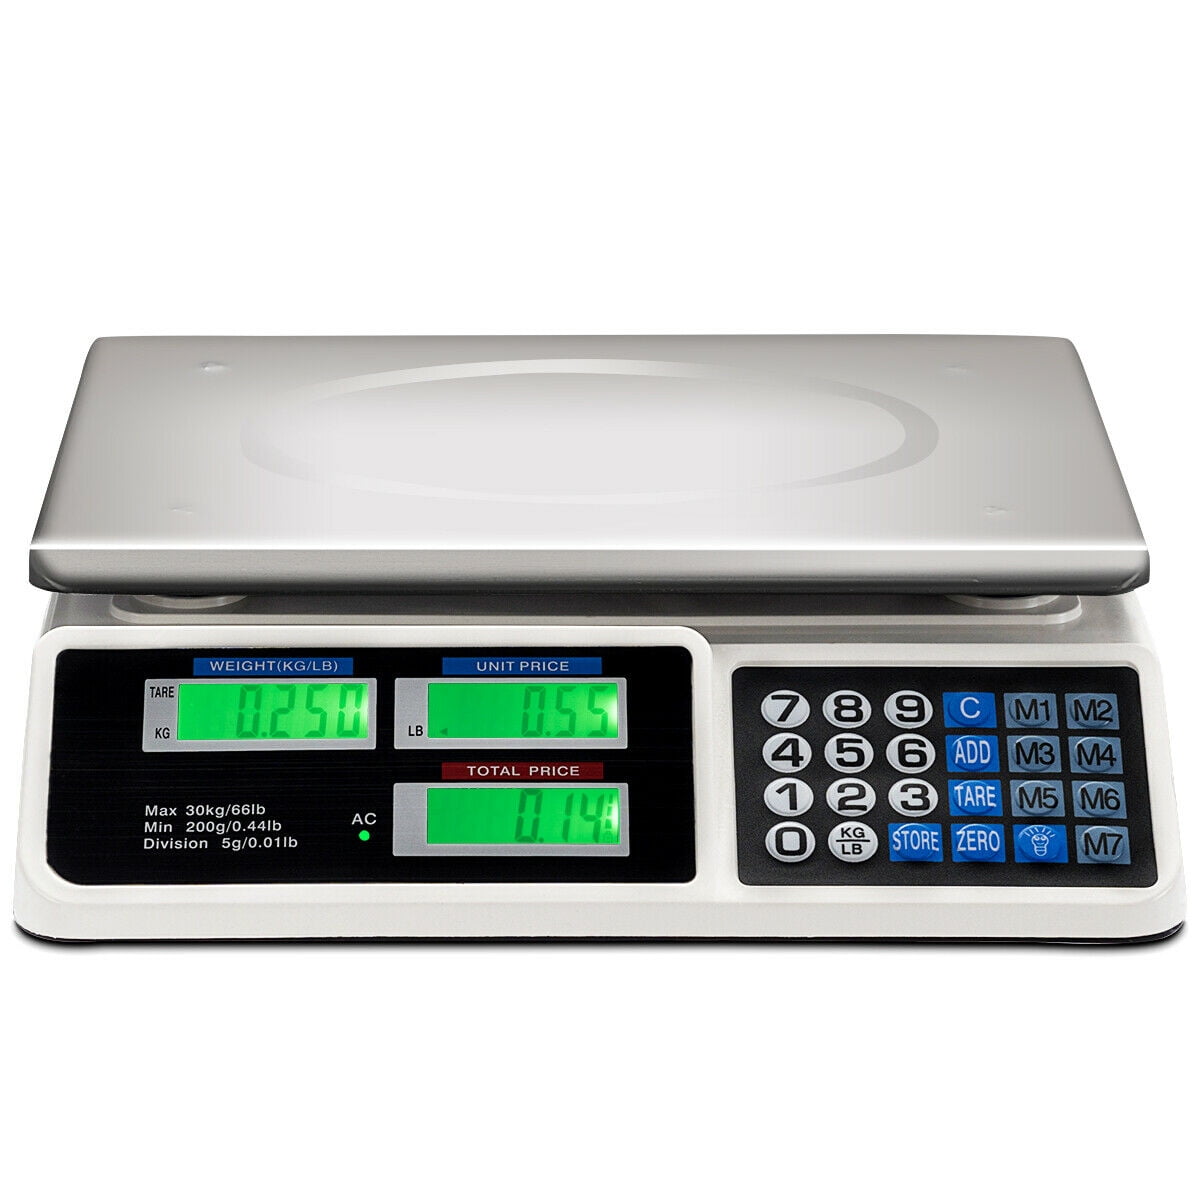 Digital Scale Price Computing Counting Weight Food Meat Produce Deli Market Shop 